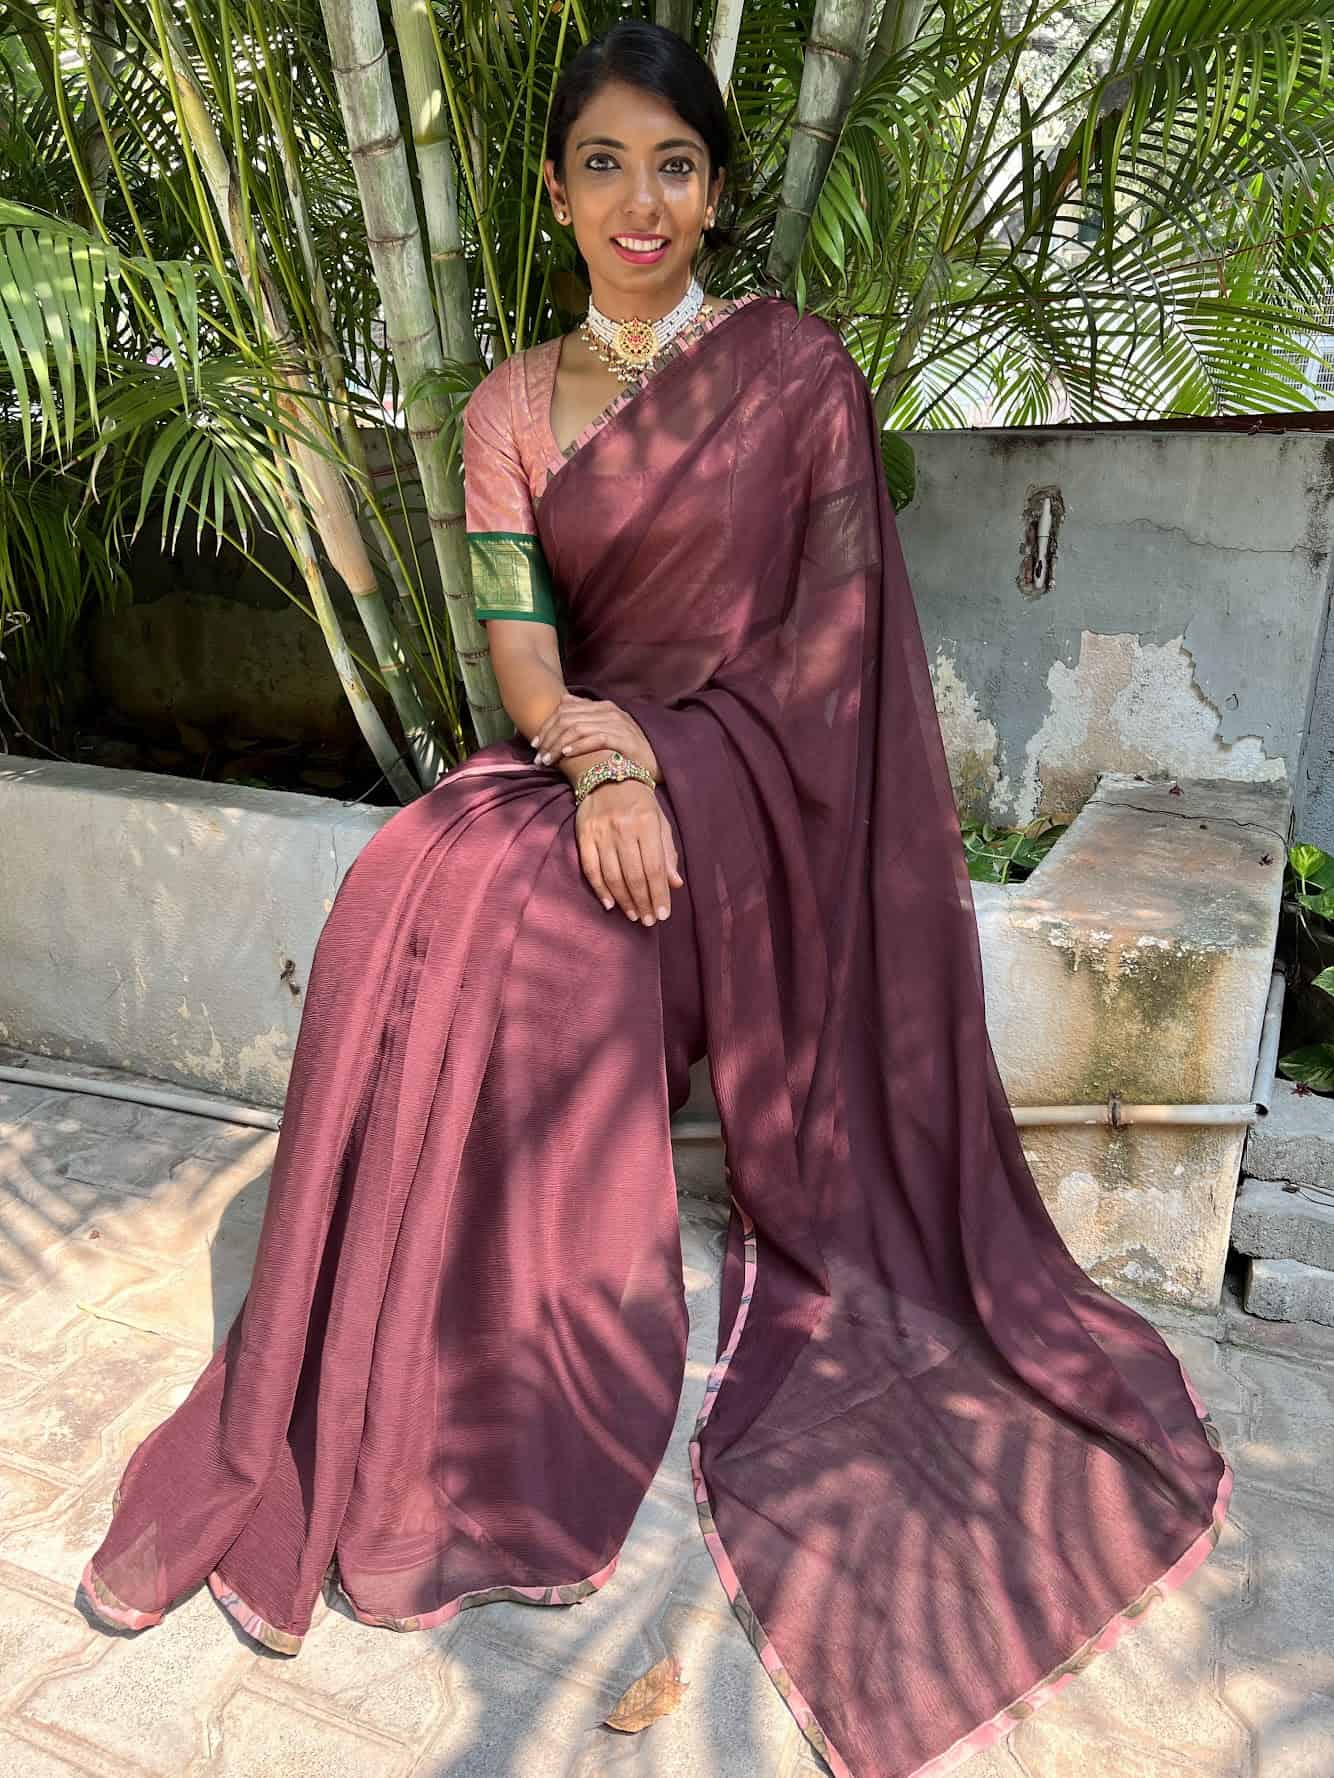 The Home Affair Floral Print Pre-draped Ruffle Saree With Blouse | Brown,  Floral, Chiffon, V Neck, Elbow | Boho chic blouses, Aza fashion, Floral  chiffon